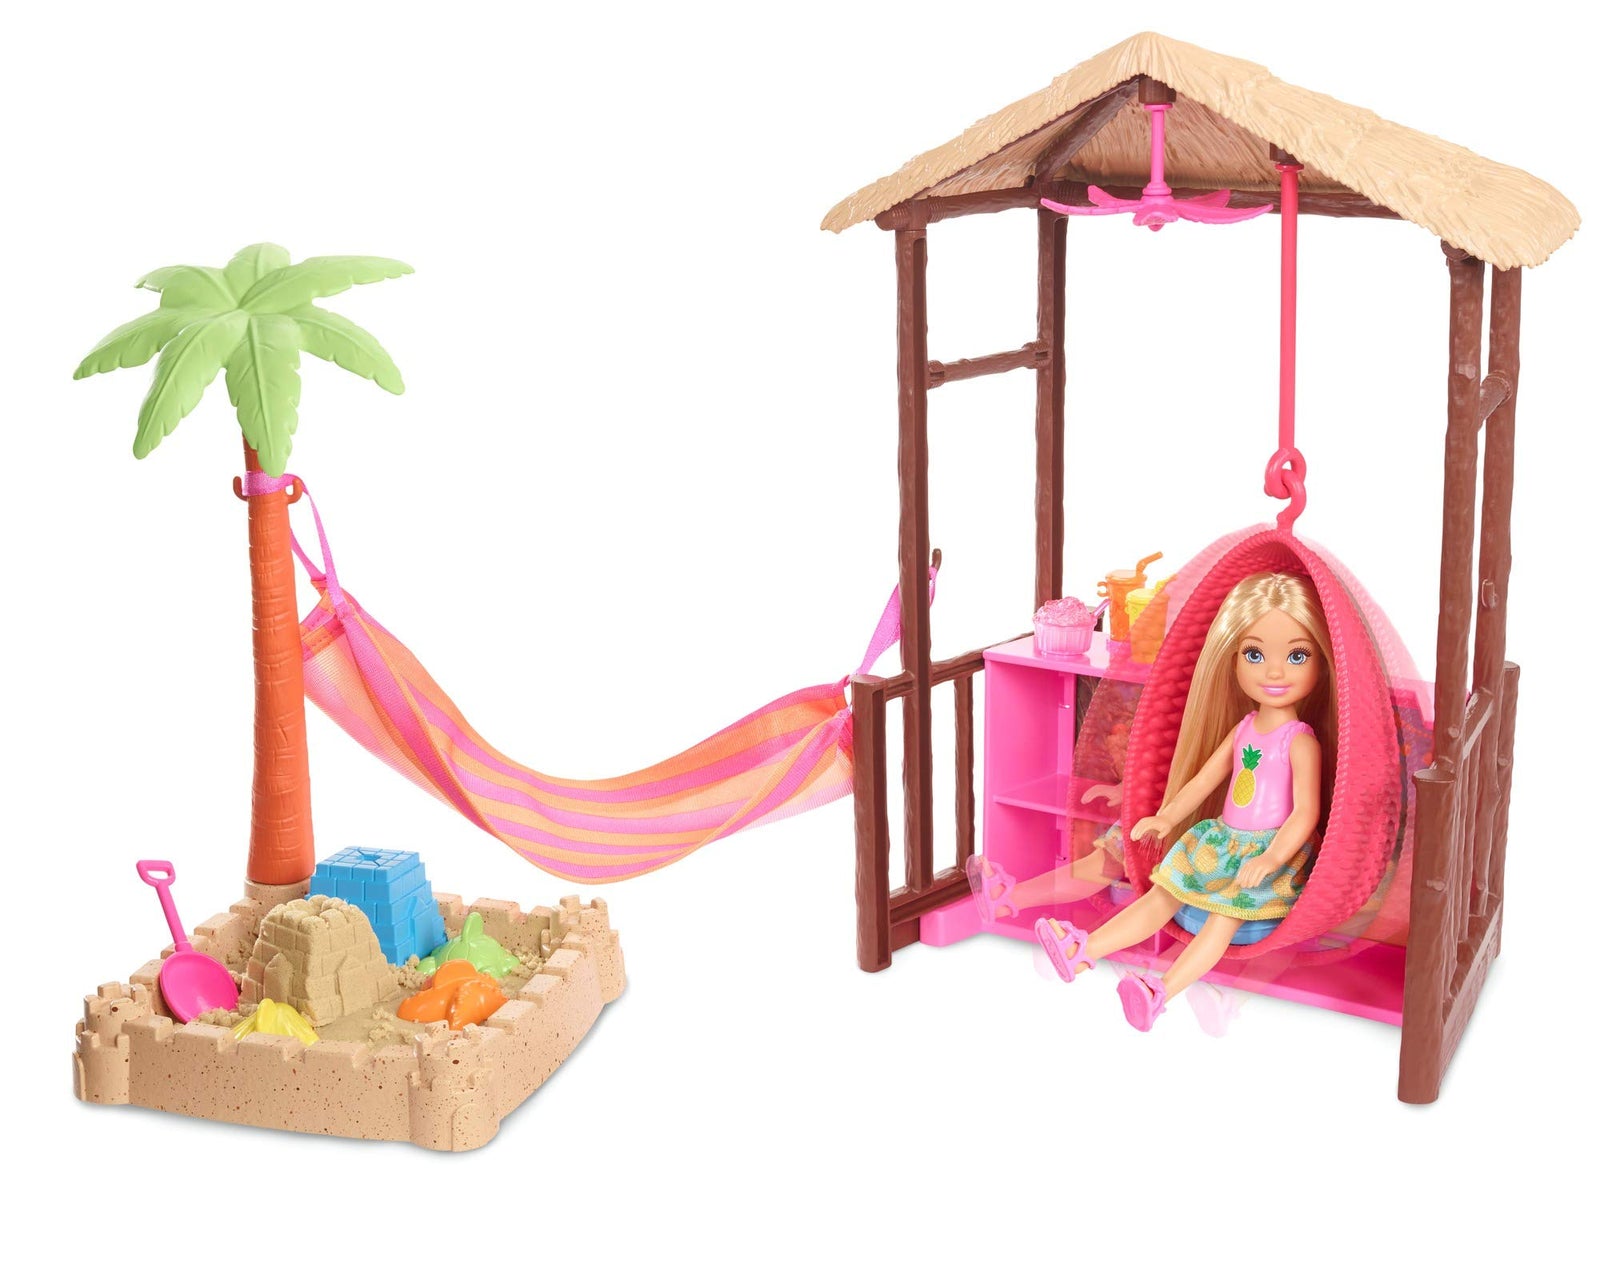 Barbie Chelsea Doll and Tiki Hut Playset with 6-inch Blonde Doll, Hut with Swing, Hammock, Moldable Sand, 4 Molds and 4 Storytelling Pieces, Gift for 3 to 7 Year Olds [Amazon Exclusive]